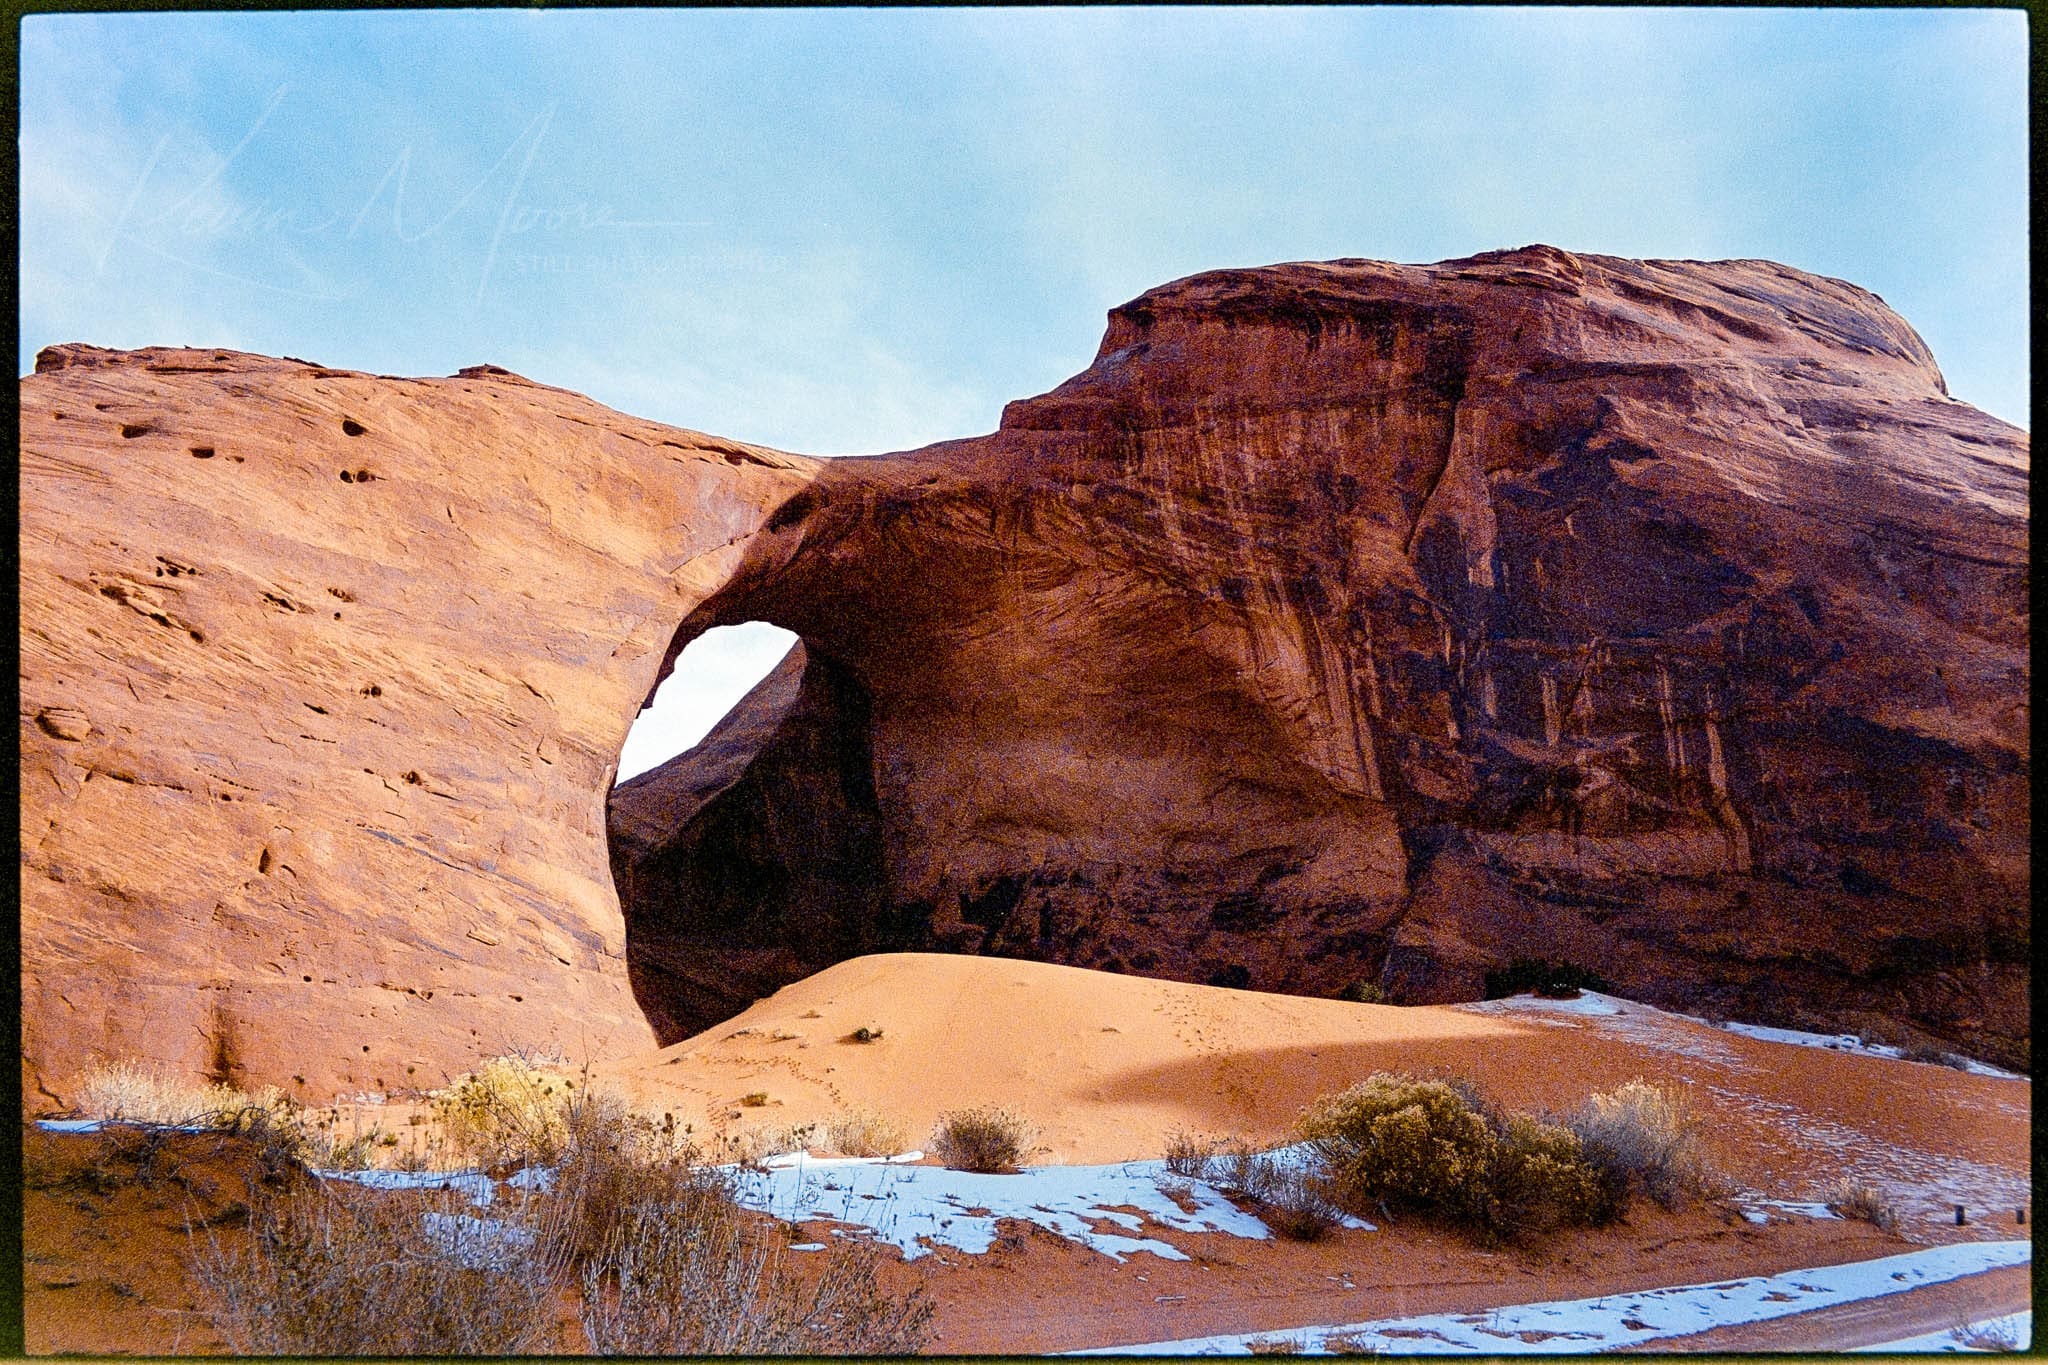 Stunning sandstone arch formation in a desert landscape with patches of snow.